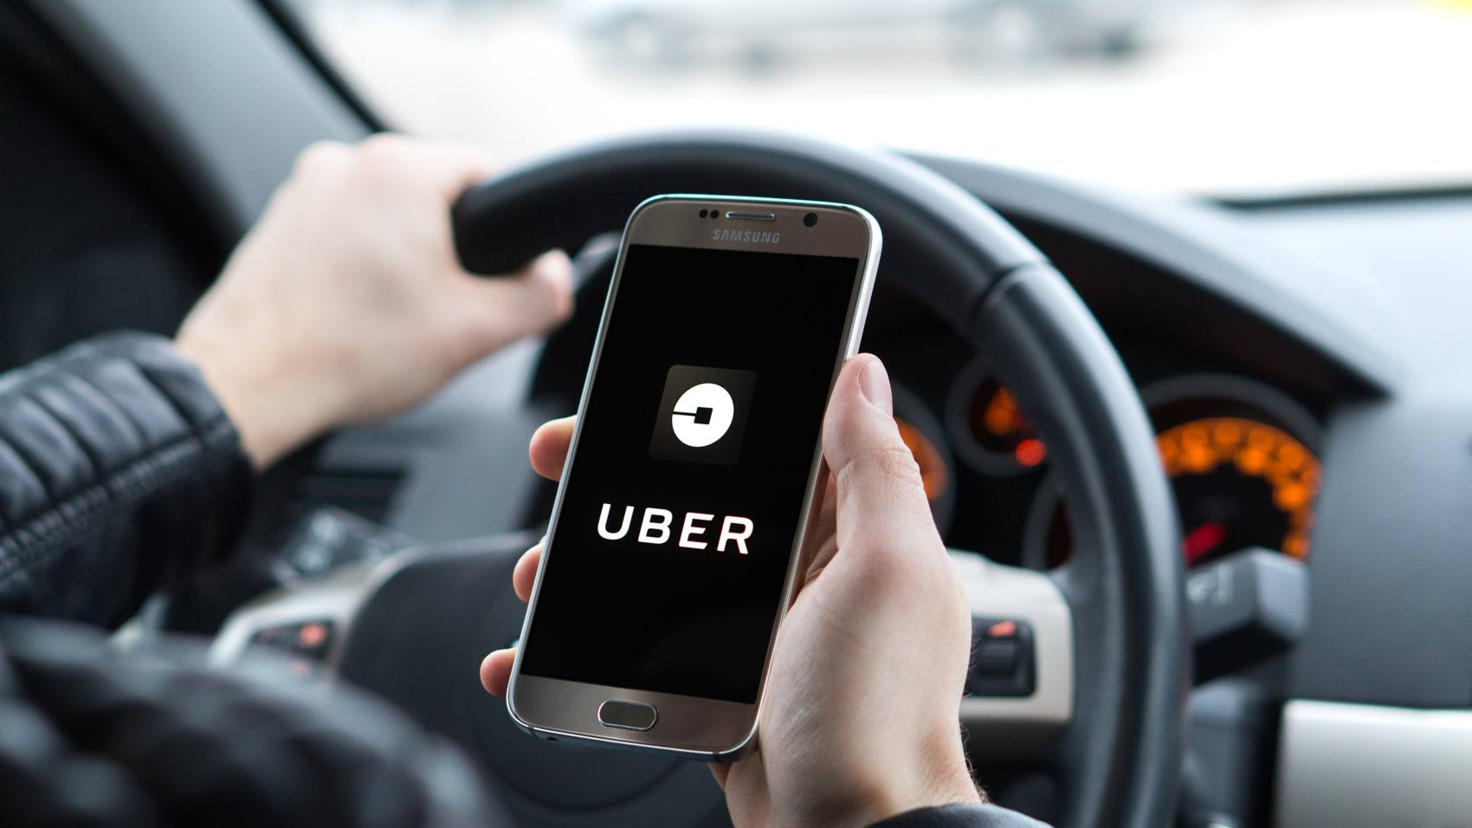 Uber expands services with announcement of digital wallet and relaunched credit card